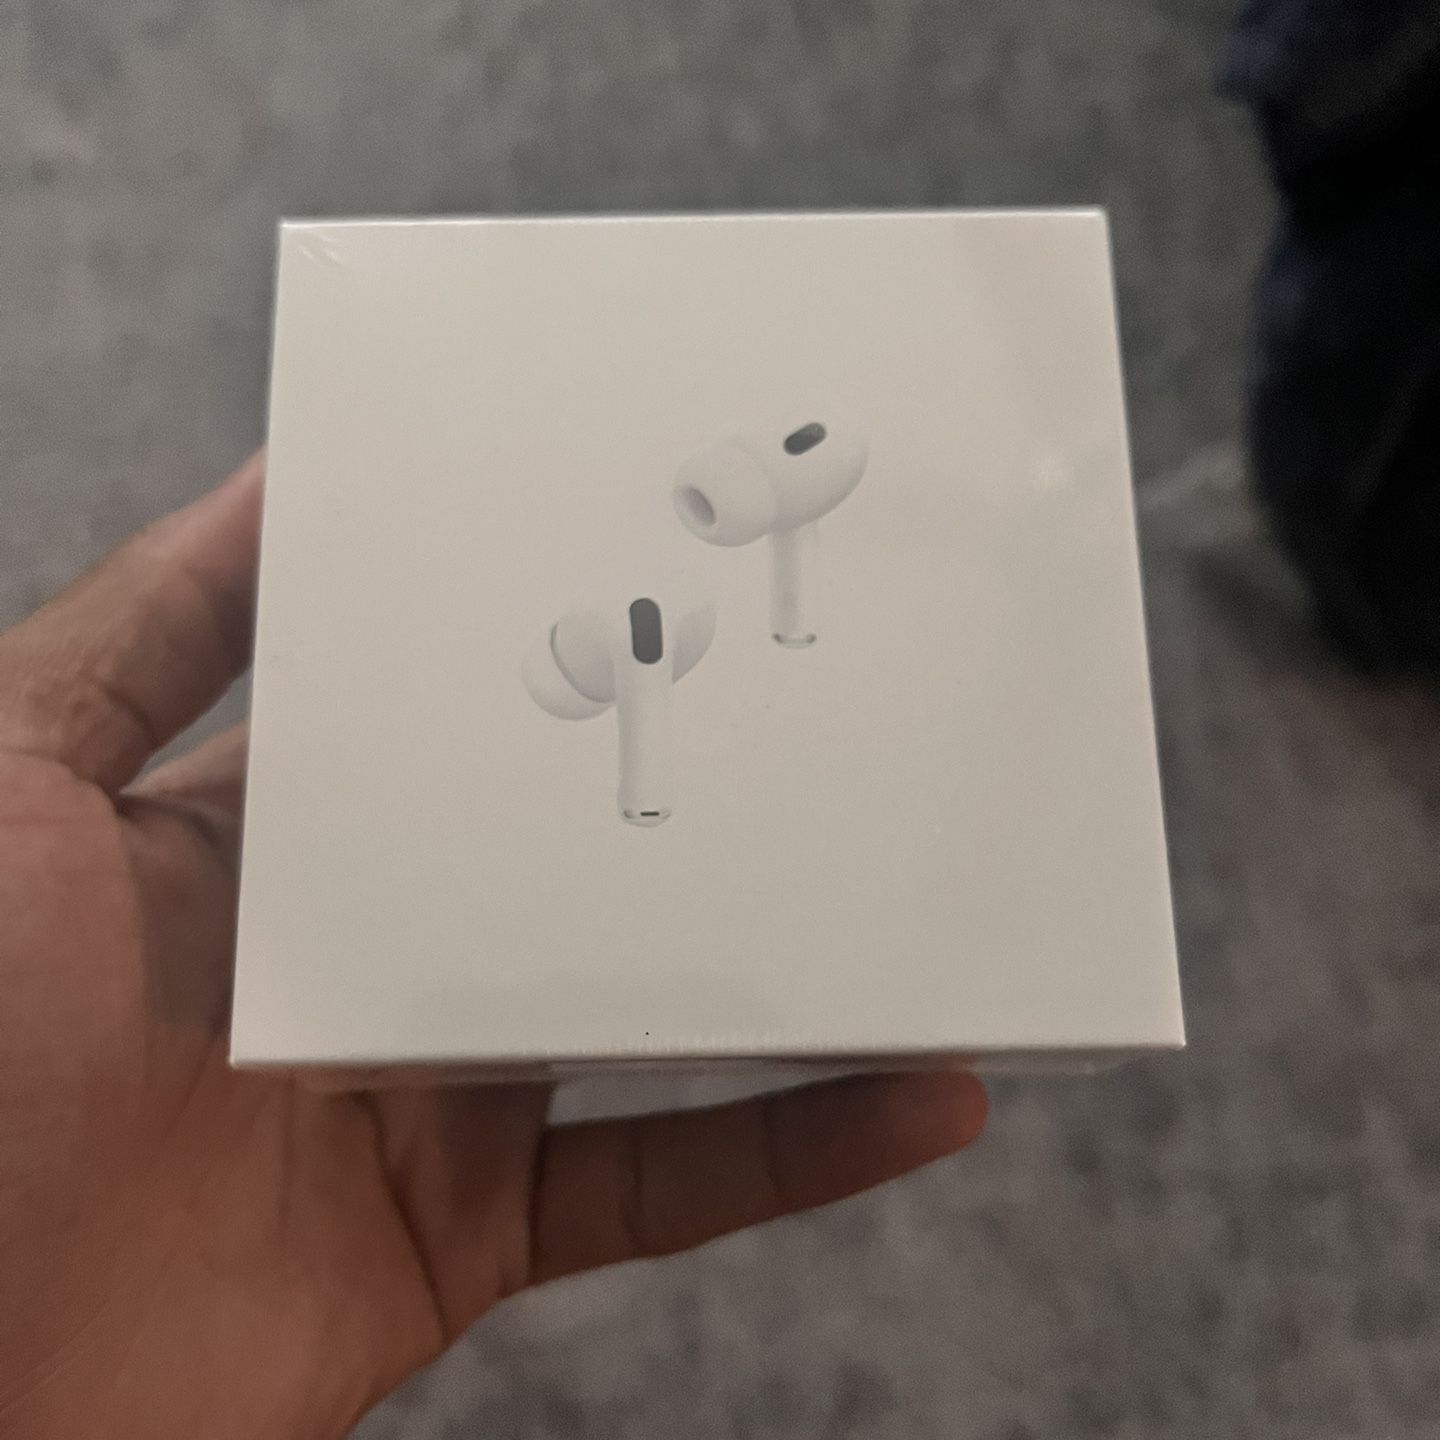 Brand new AirPods Pro 2